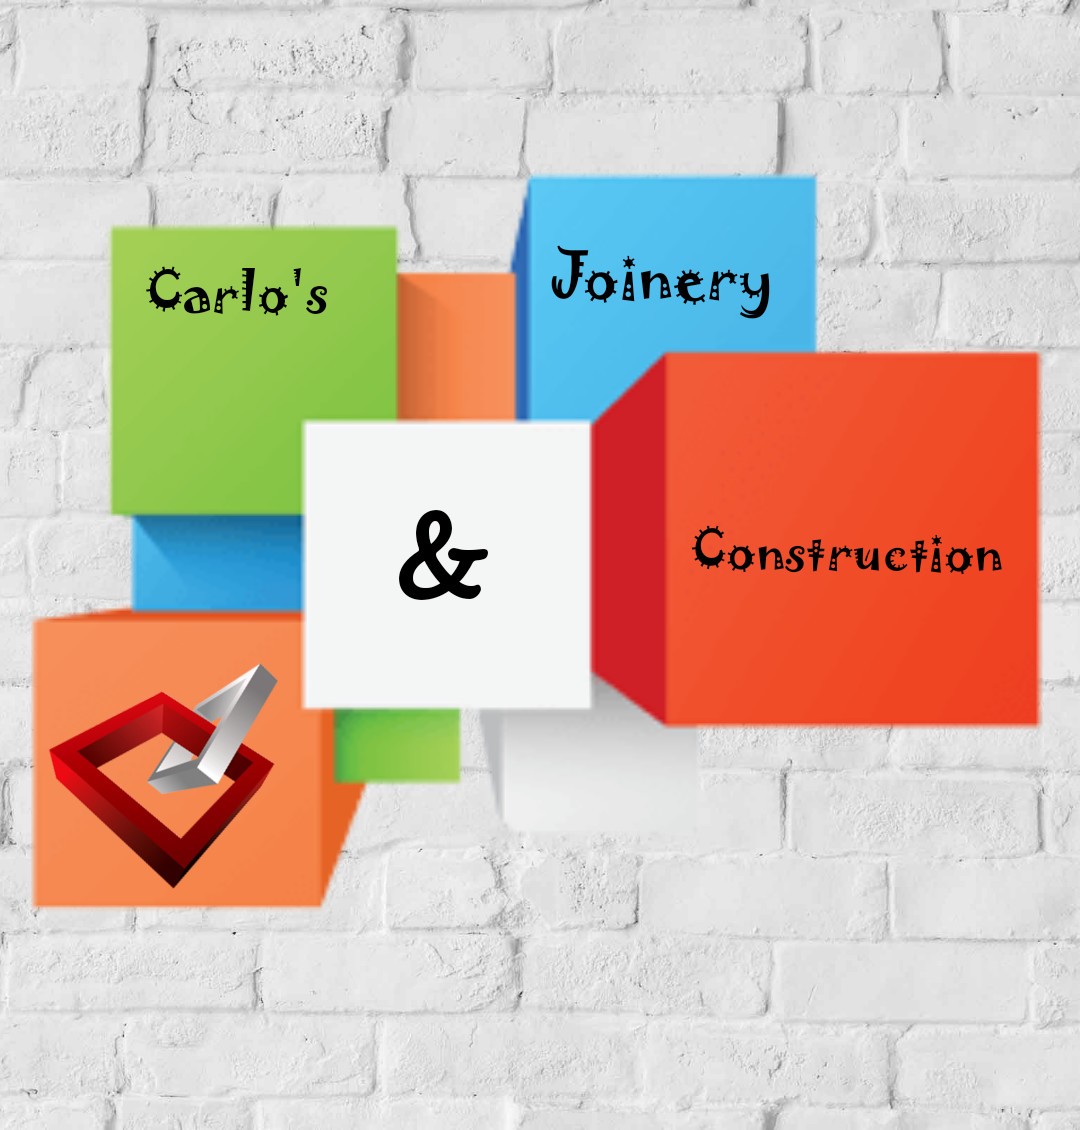 Carlo's Joinery & Construction Services